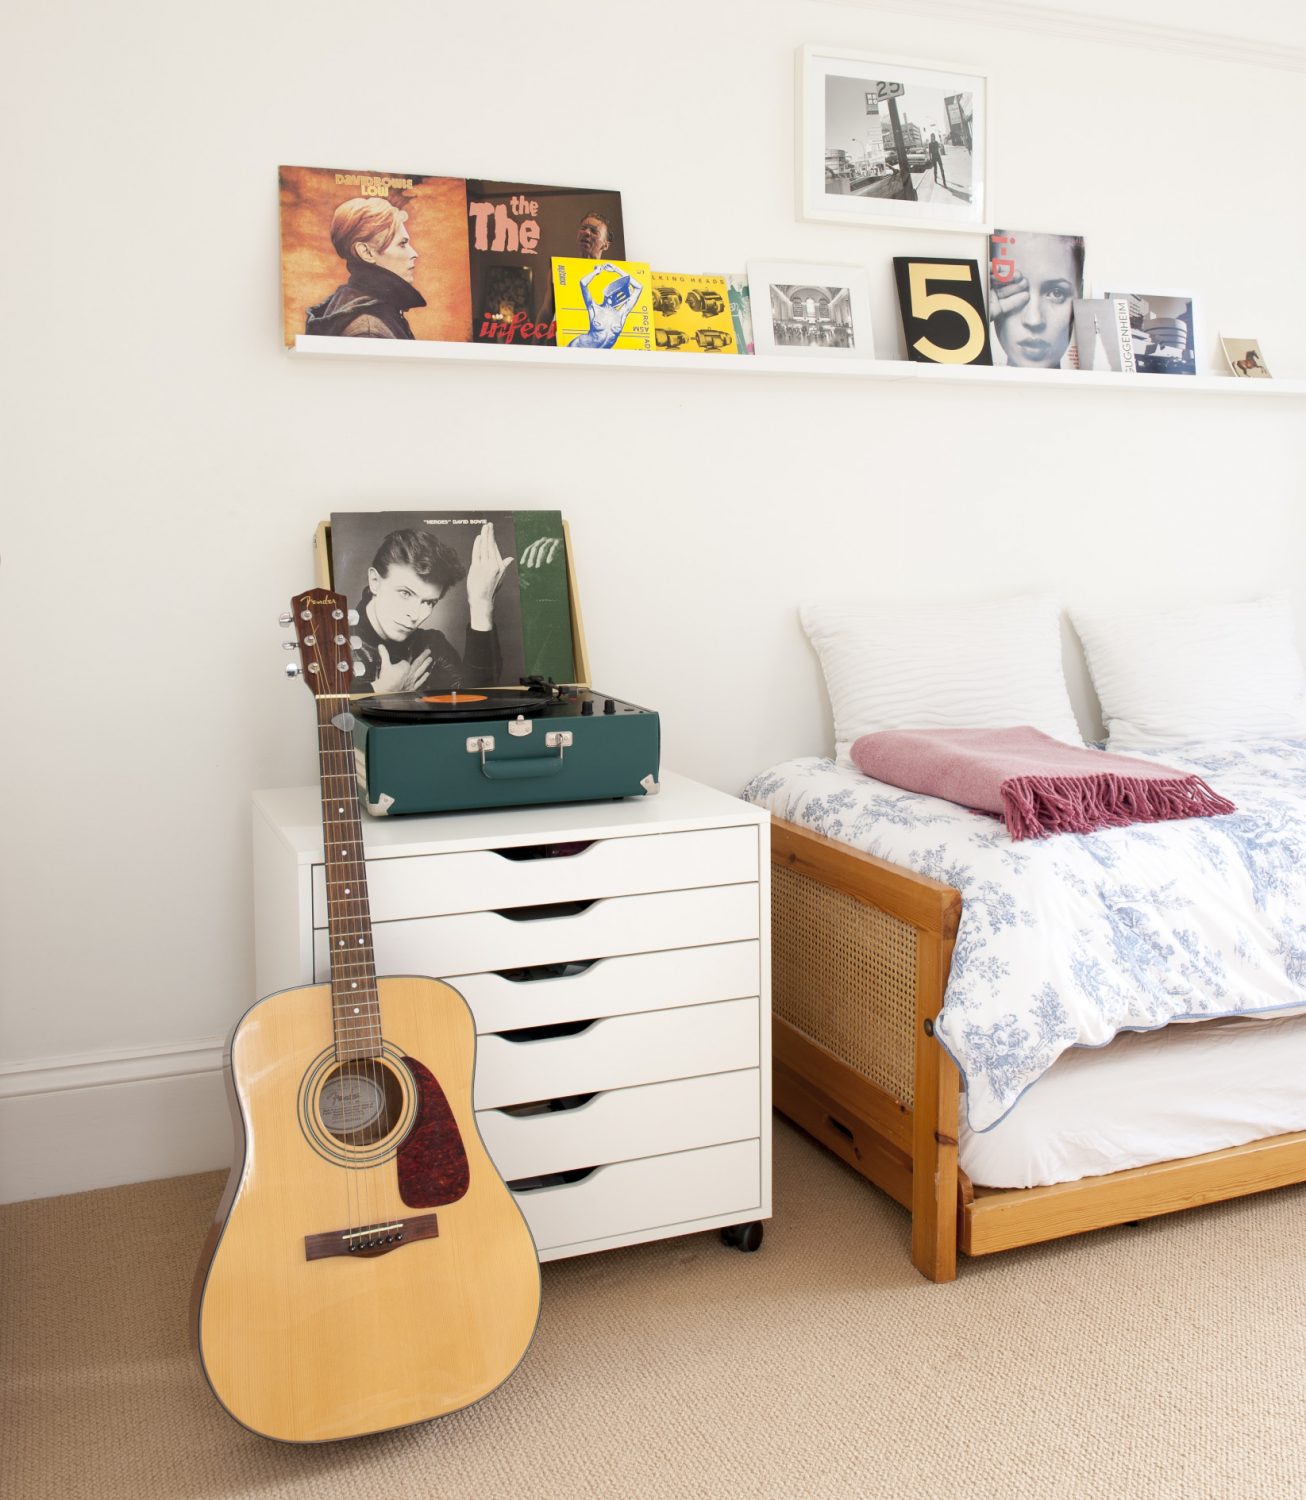 Musical elements are found throughout the home